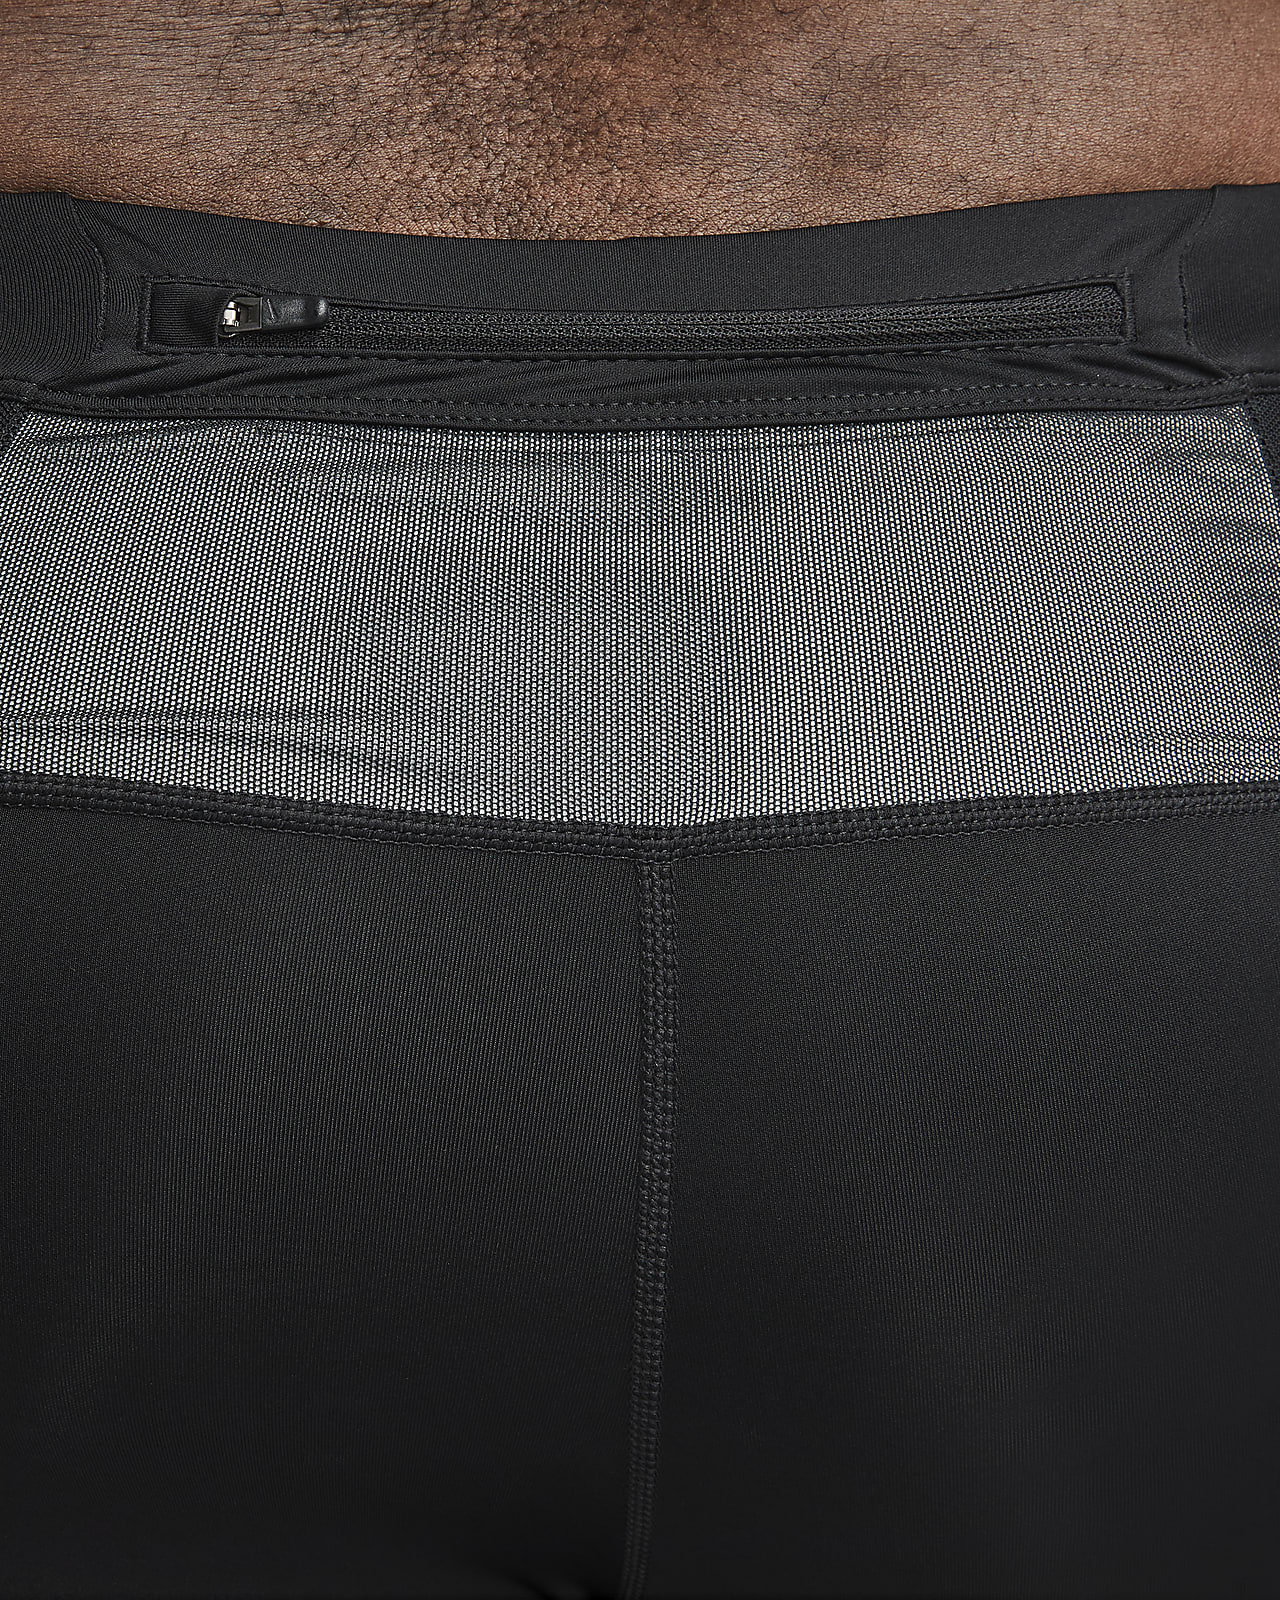 Nike Lava Loops, Half Tights with Storage Nike has finally released a  Men's half tight with pockets! They've had Women's Nike Trail h